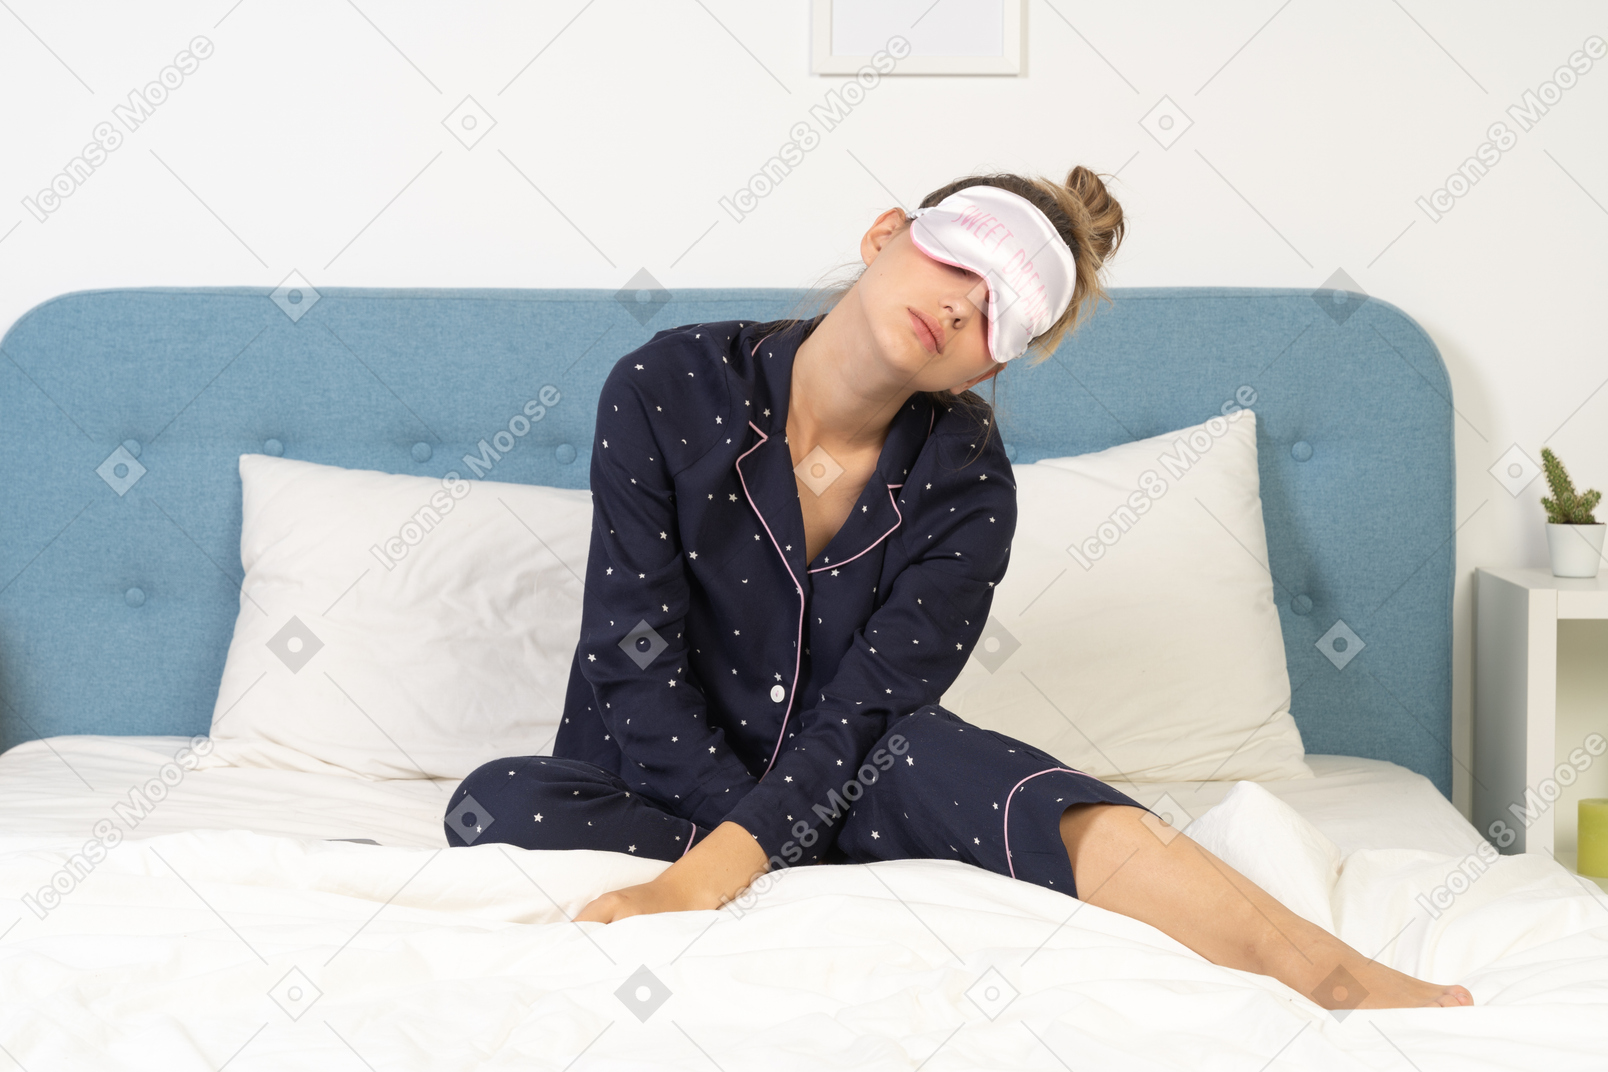 Front view of a young lady in pajamas putting on a sleeping mask